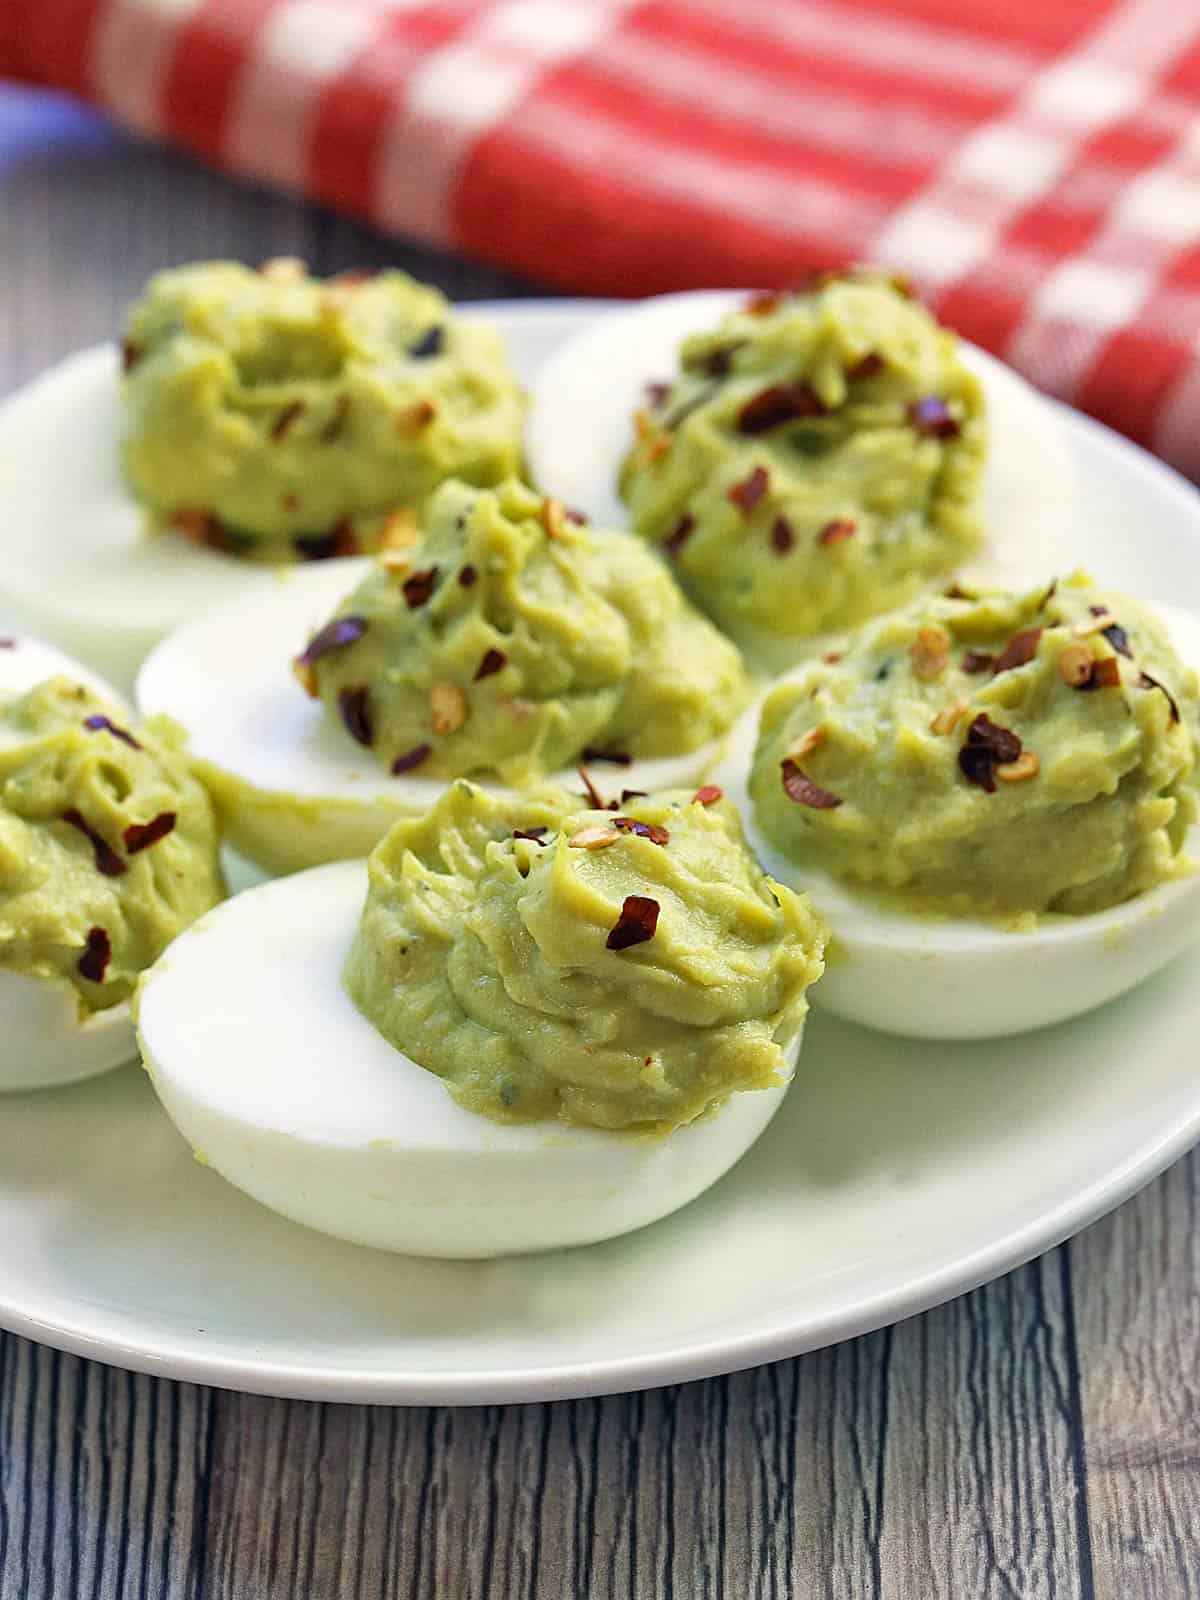 Avocado deviled eggs are served on a white plate.